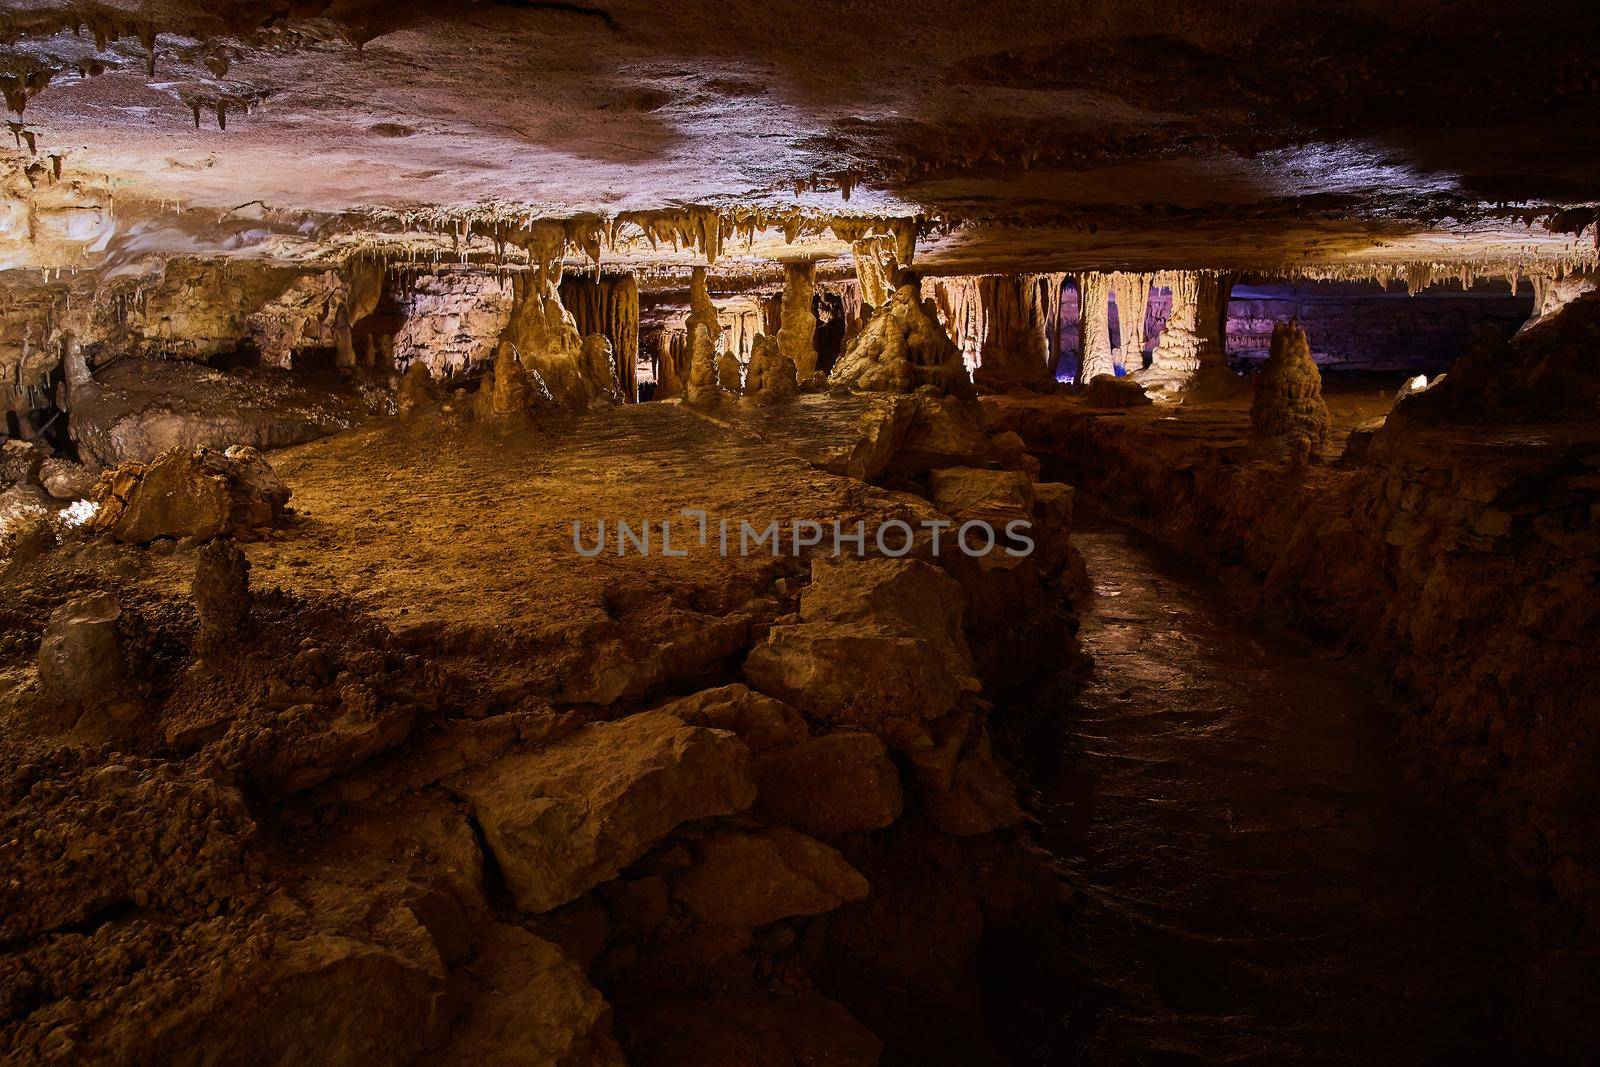 Image of Narrow cave filled with formations of stalagmites and stalactites